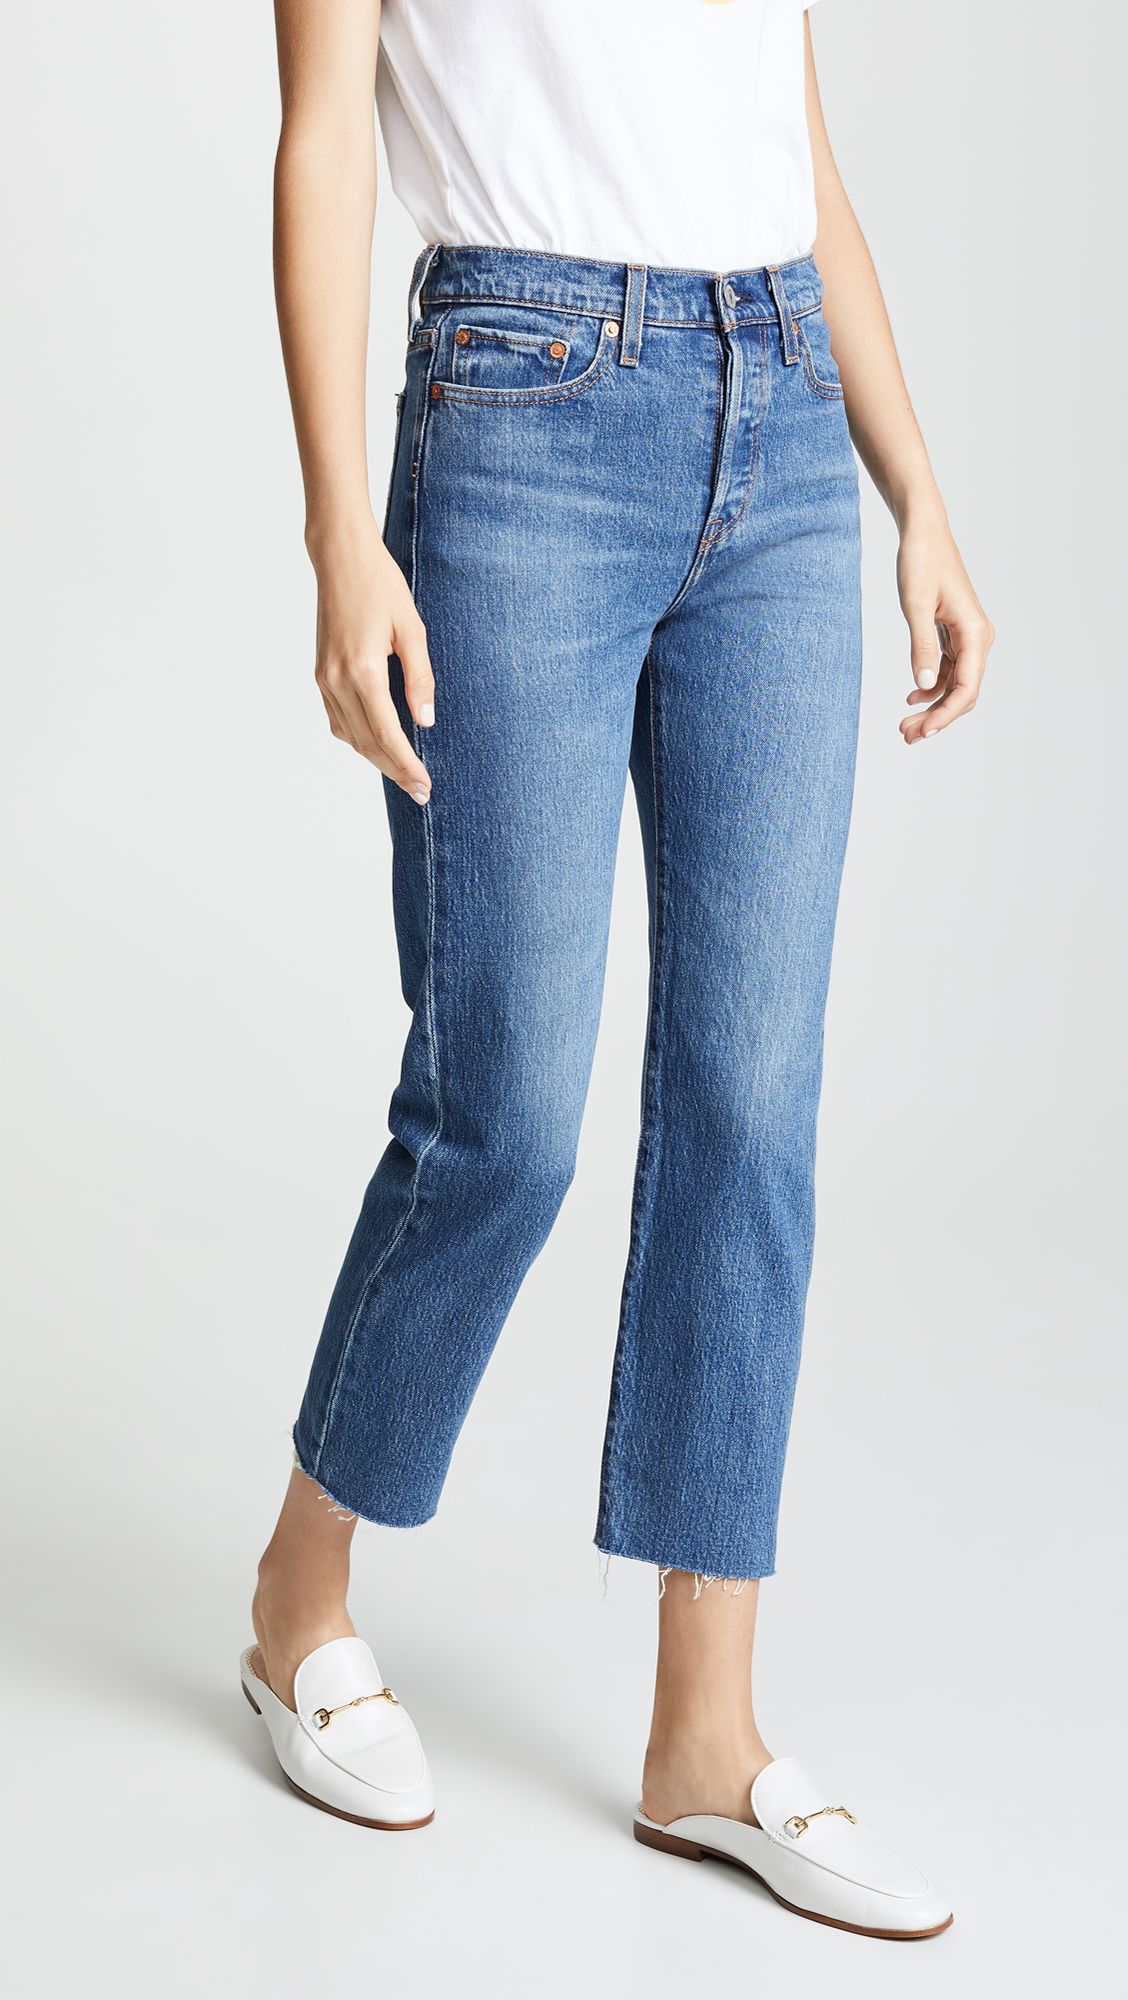 The 10 Best-Selling Jeans on Who What Wear This Month | Who What Wear